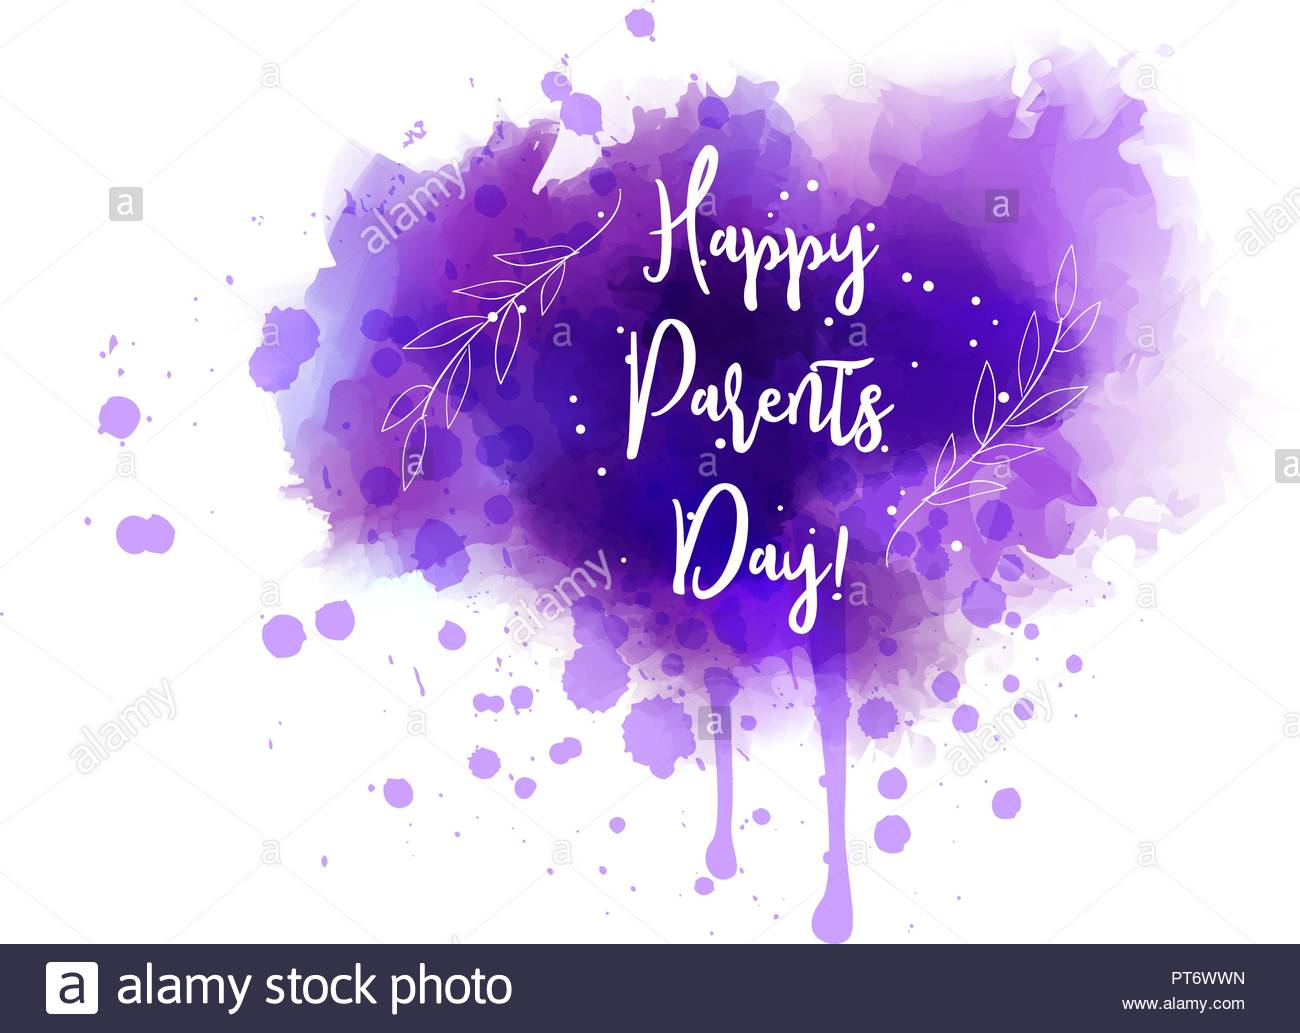 Free download Happy Parents Day Abstract grunge watercolor ...